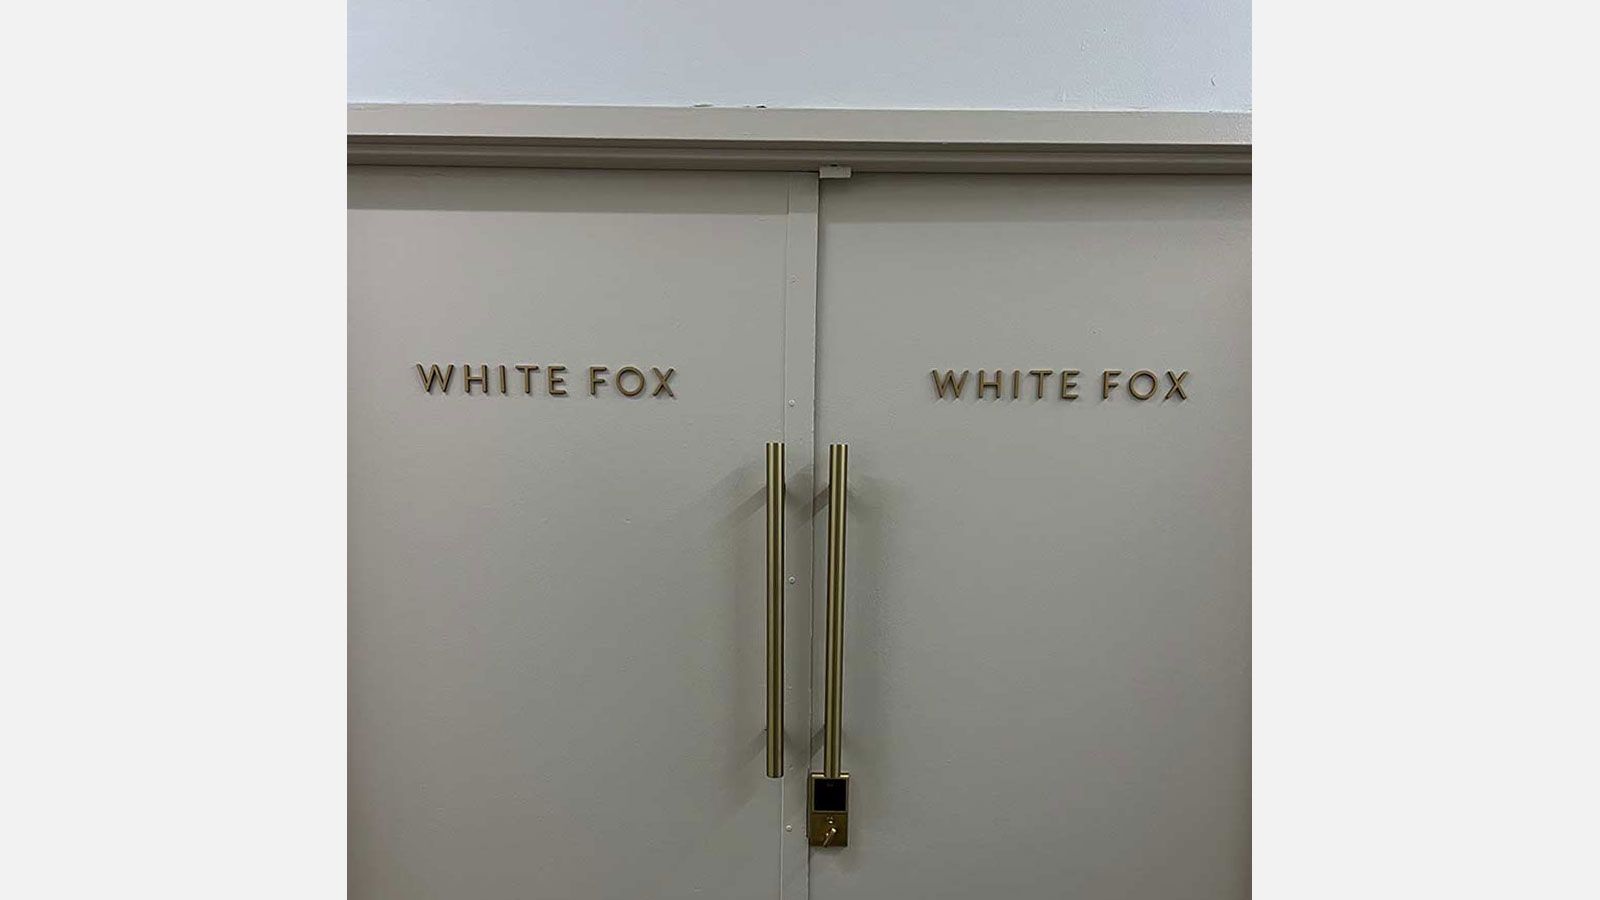 White Fox acrylic signs attached to the doors